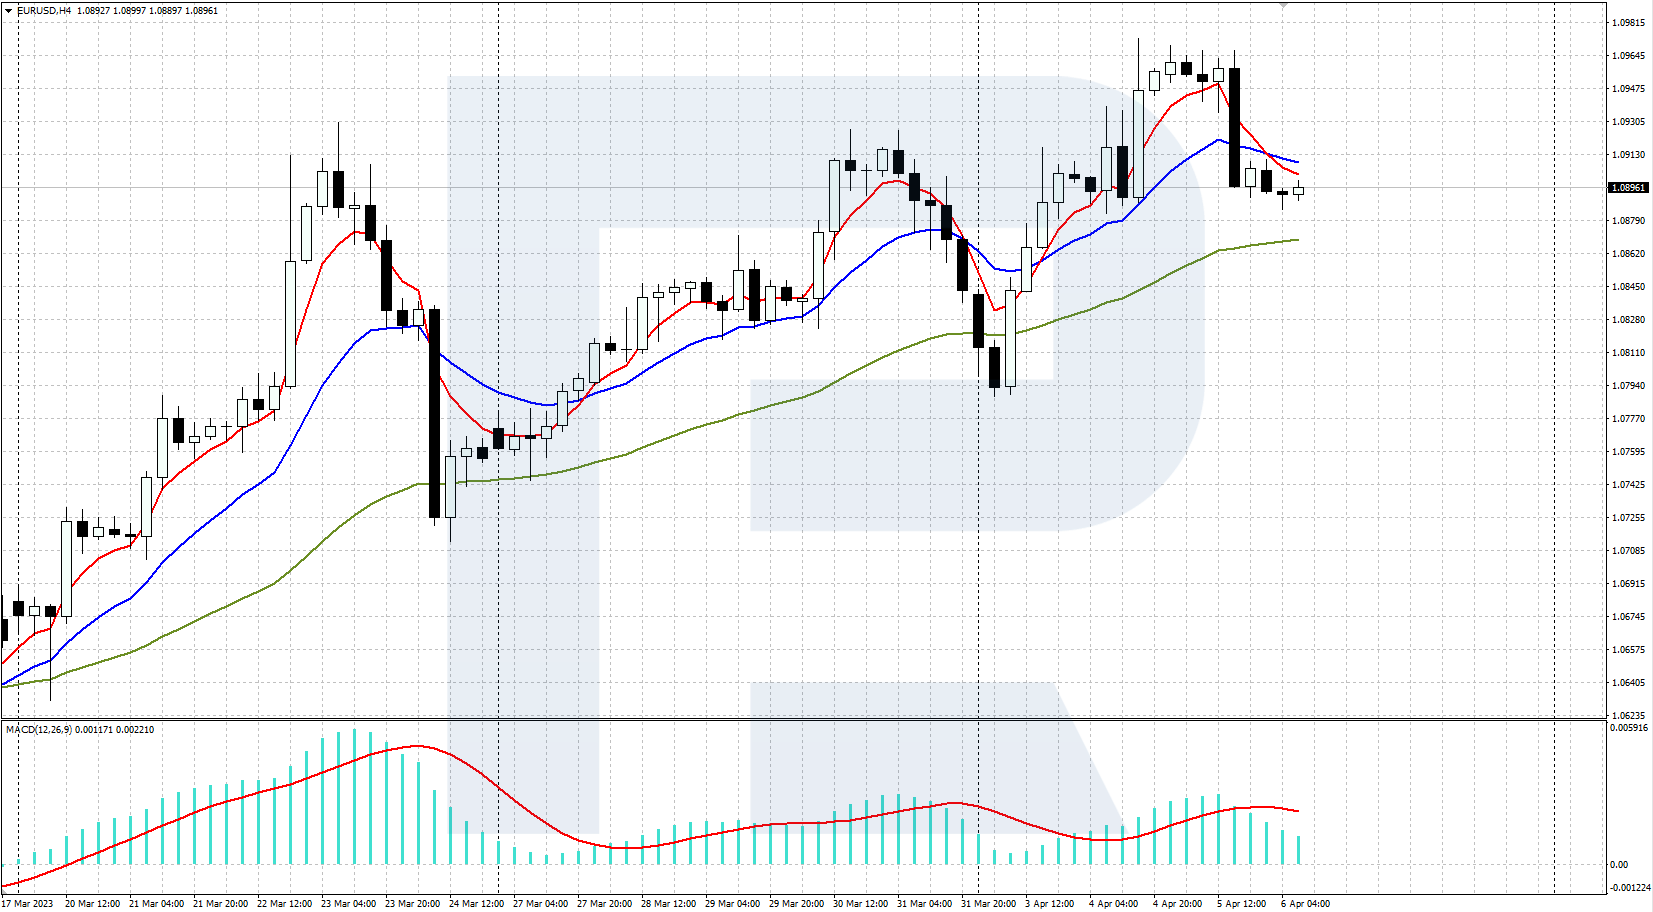 Moving Average and MACD indicators on the price chart